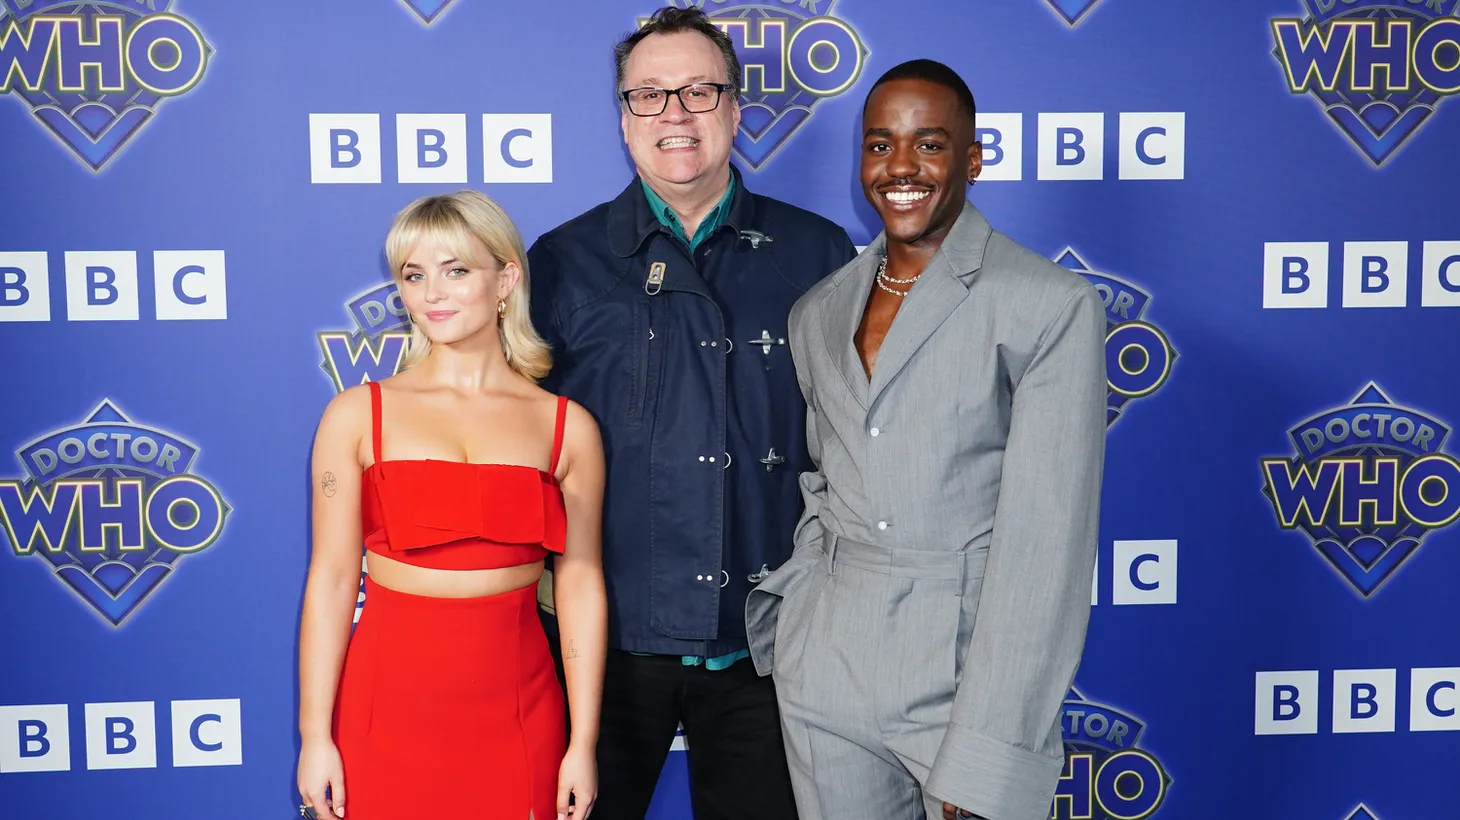 Doctor Who’s Millie Gibson, Russell T Davies, and Ncuti Gatwa, arrive for the premiere of the Disney+ series at the BFI Southbank in London.